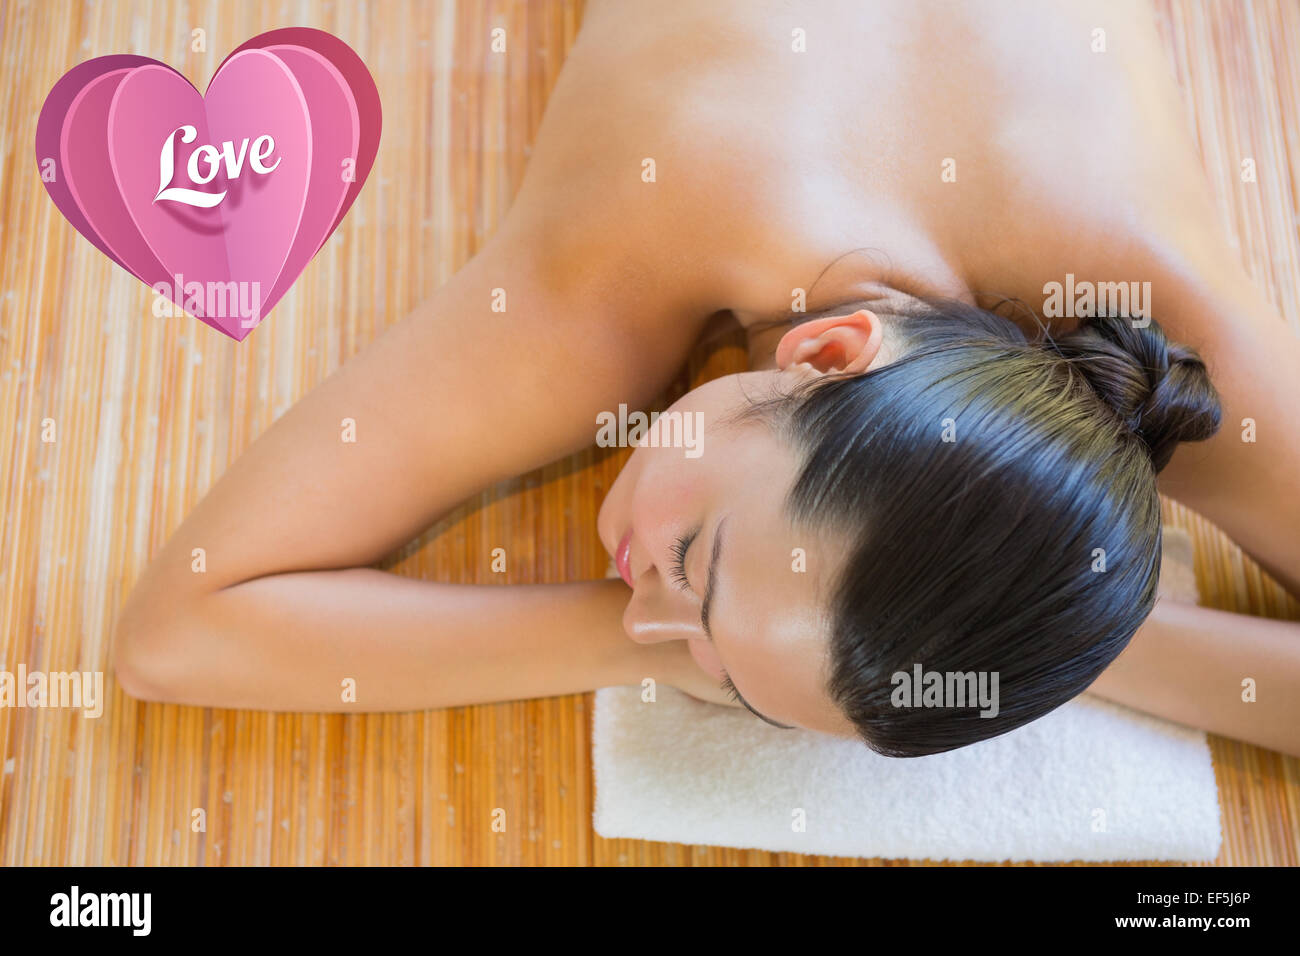 Composite image of content brunette relaxing on massage table Stock Photo